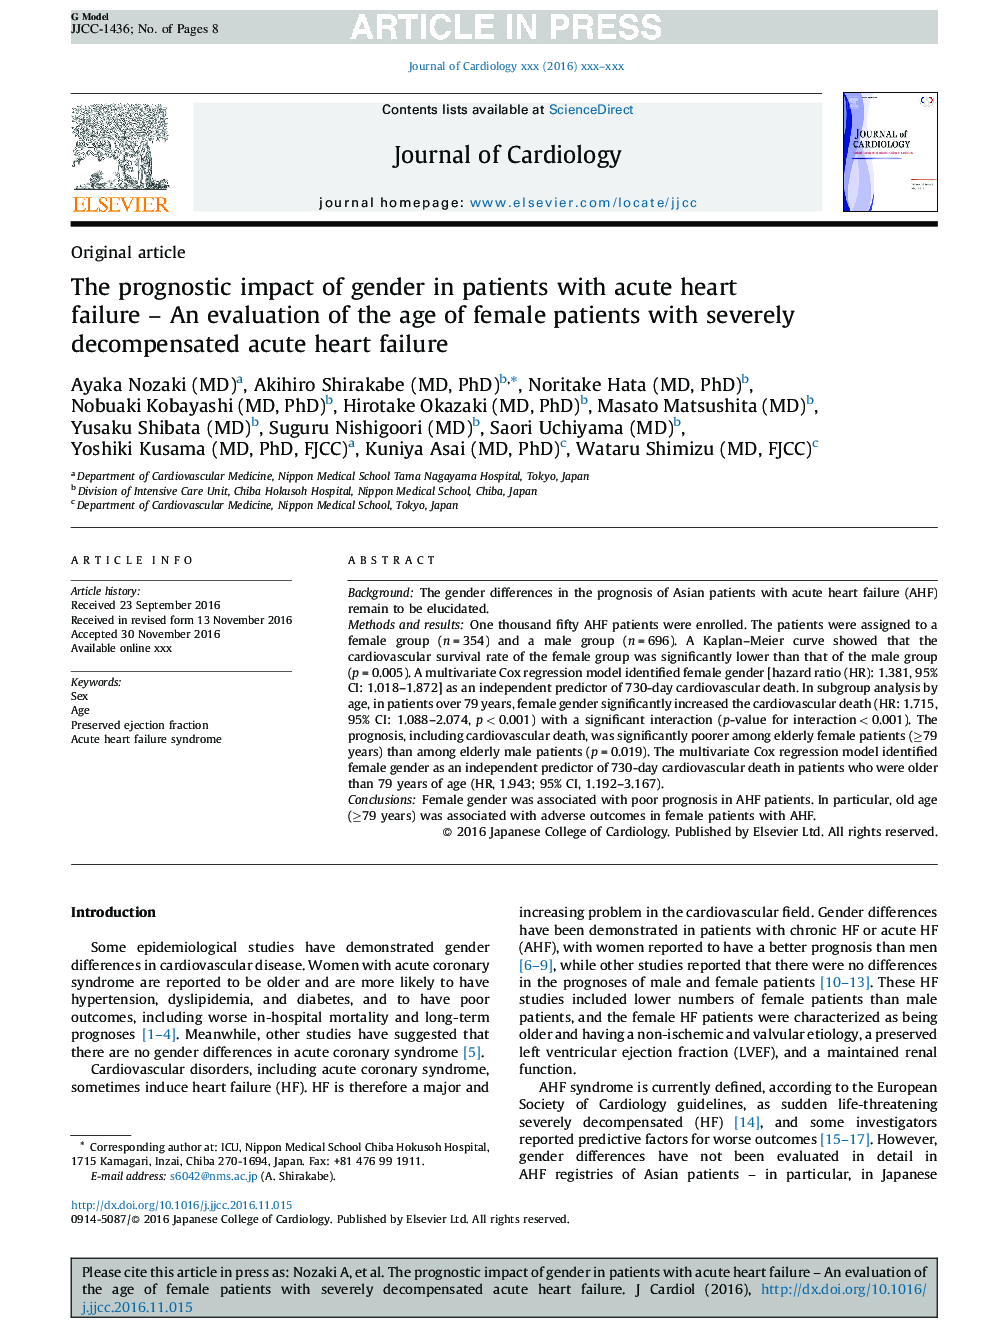 The prognostic impact of gender in patients with acute heart failure - An evaluation of the age of female patients with severely decompensated acute heart failure